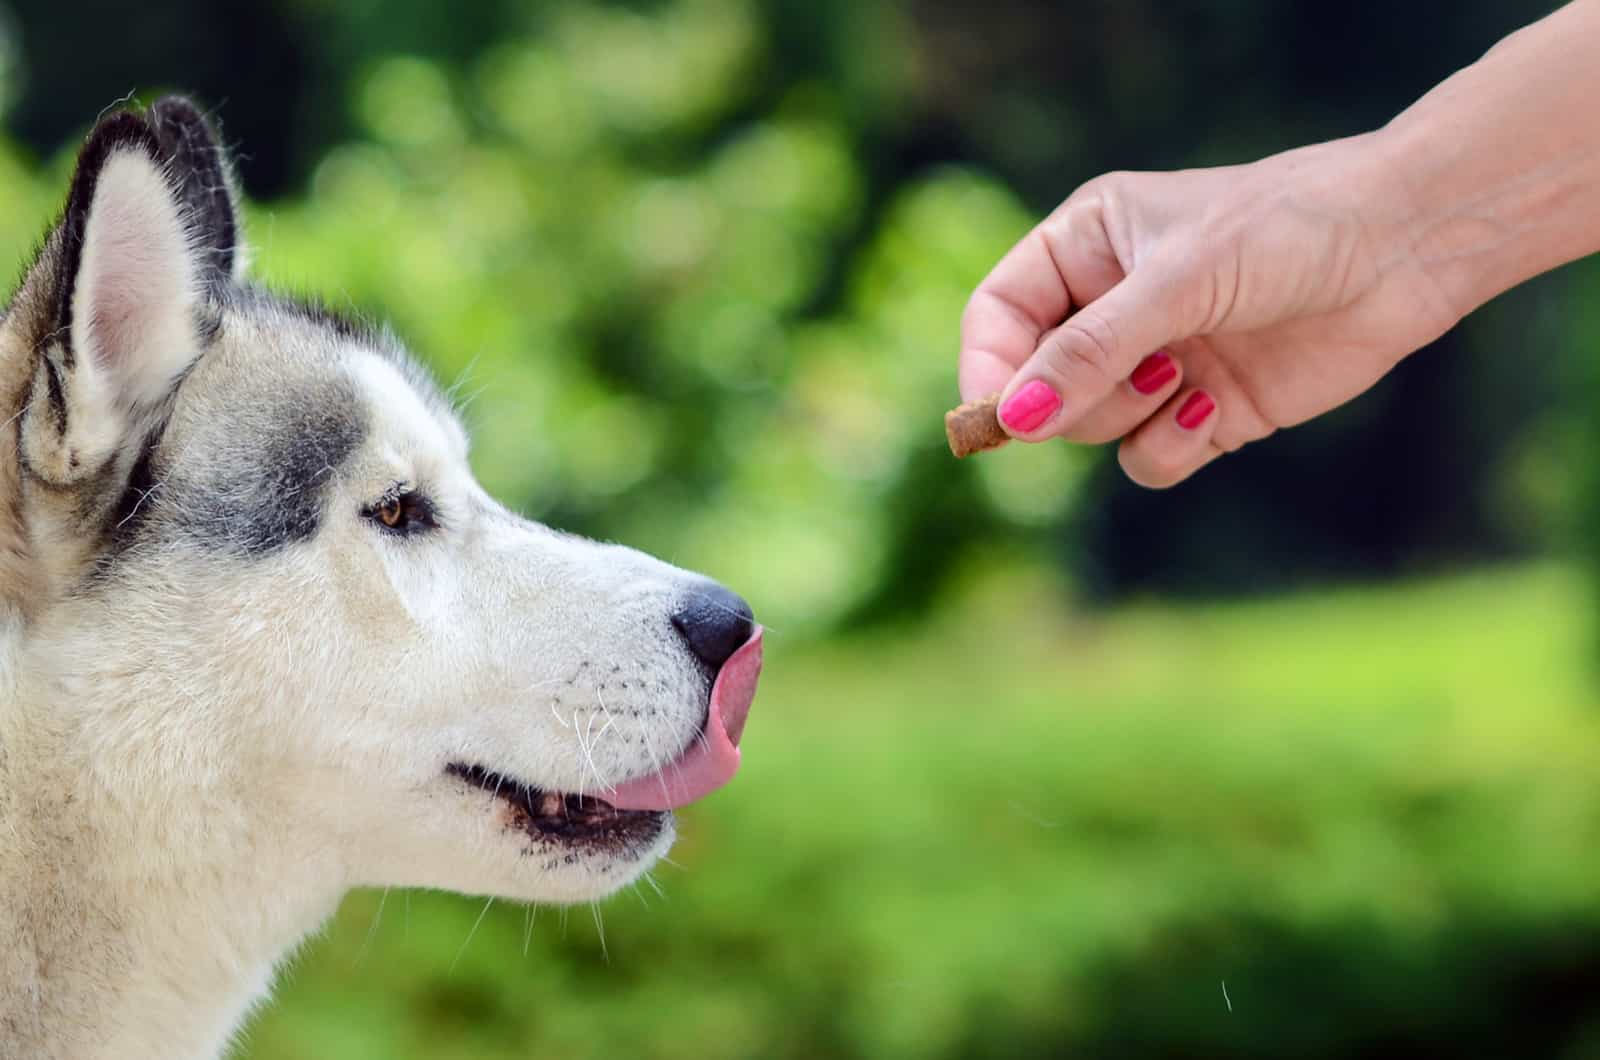 13 Best Dog Food For Huskies: Top Foods You Have To Try Out